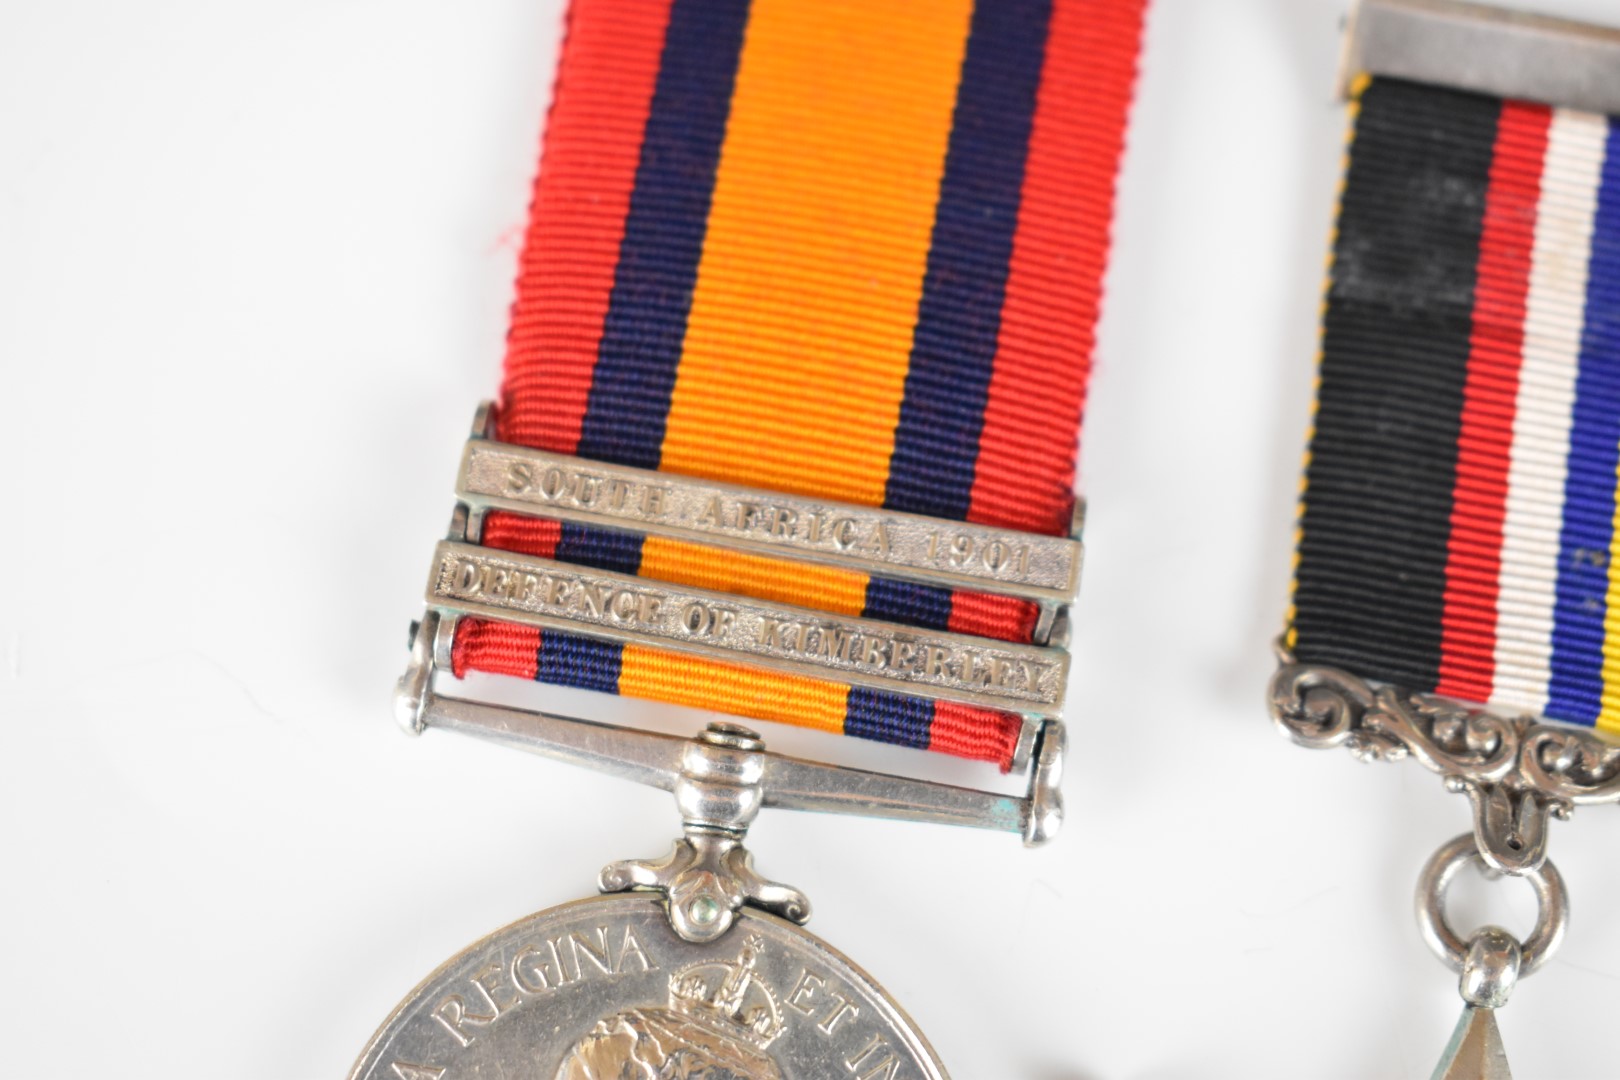 Queen's South Africa Medal with clasps for Defence of Kimberley and South Africa 1901 named to 828 - Image 17 of 22